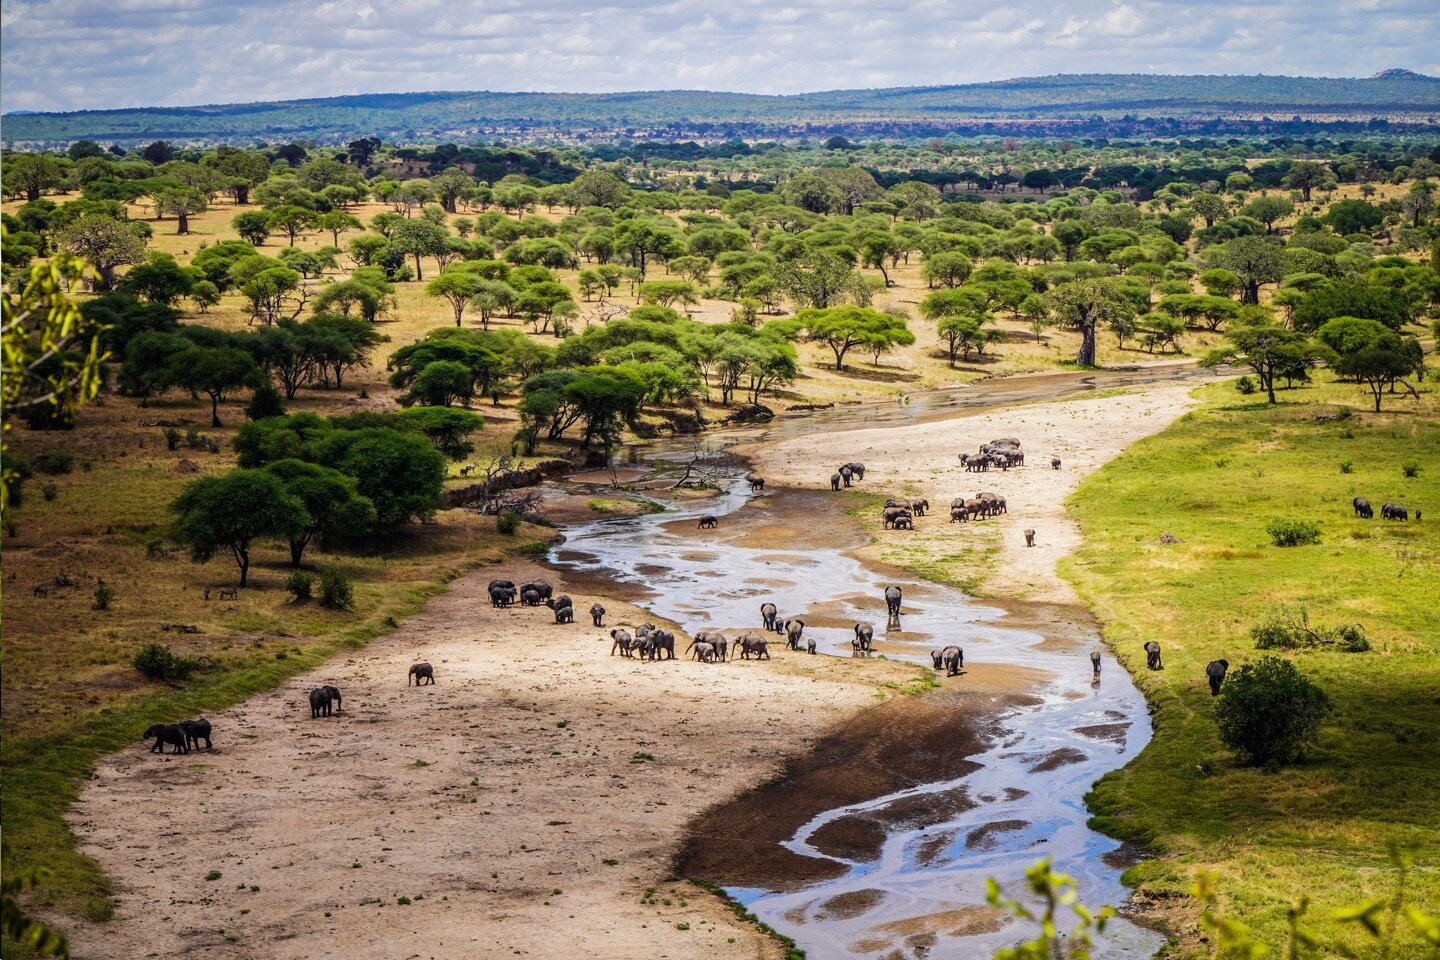 View from Tarangire Safari Lodge - Elephants in a riverbed